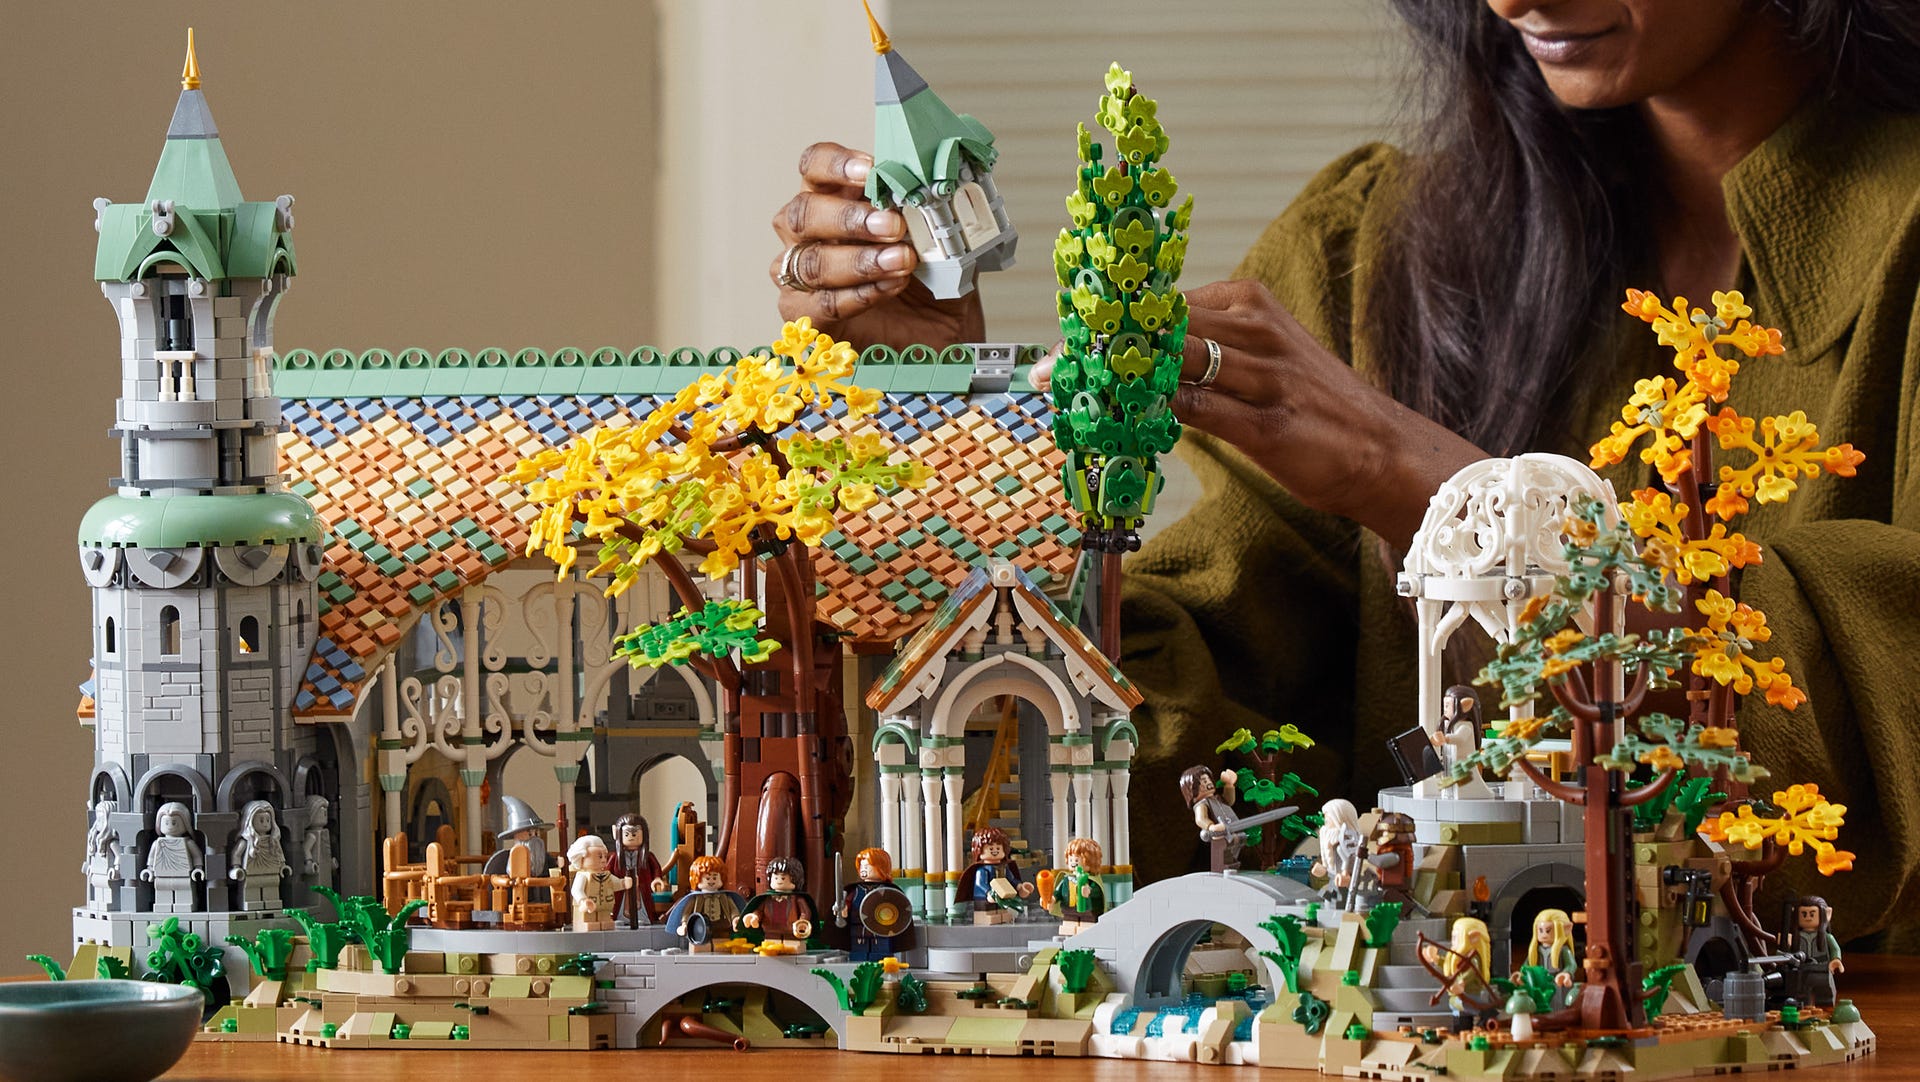 Fully build Lego Lord of the Rings Rivendell set shows a colorful selection of bricks in the form of Elrond's elven stronghold. Lego trees, a tower and a large building feature in the set.